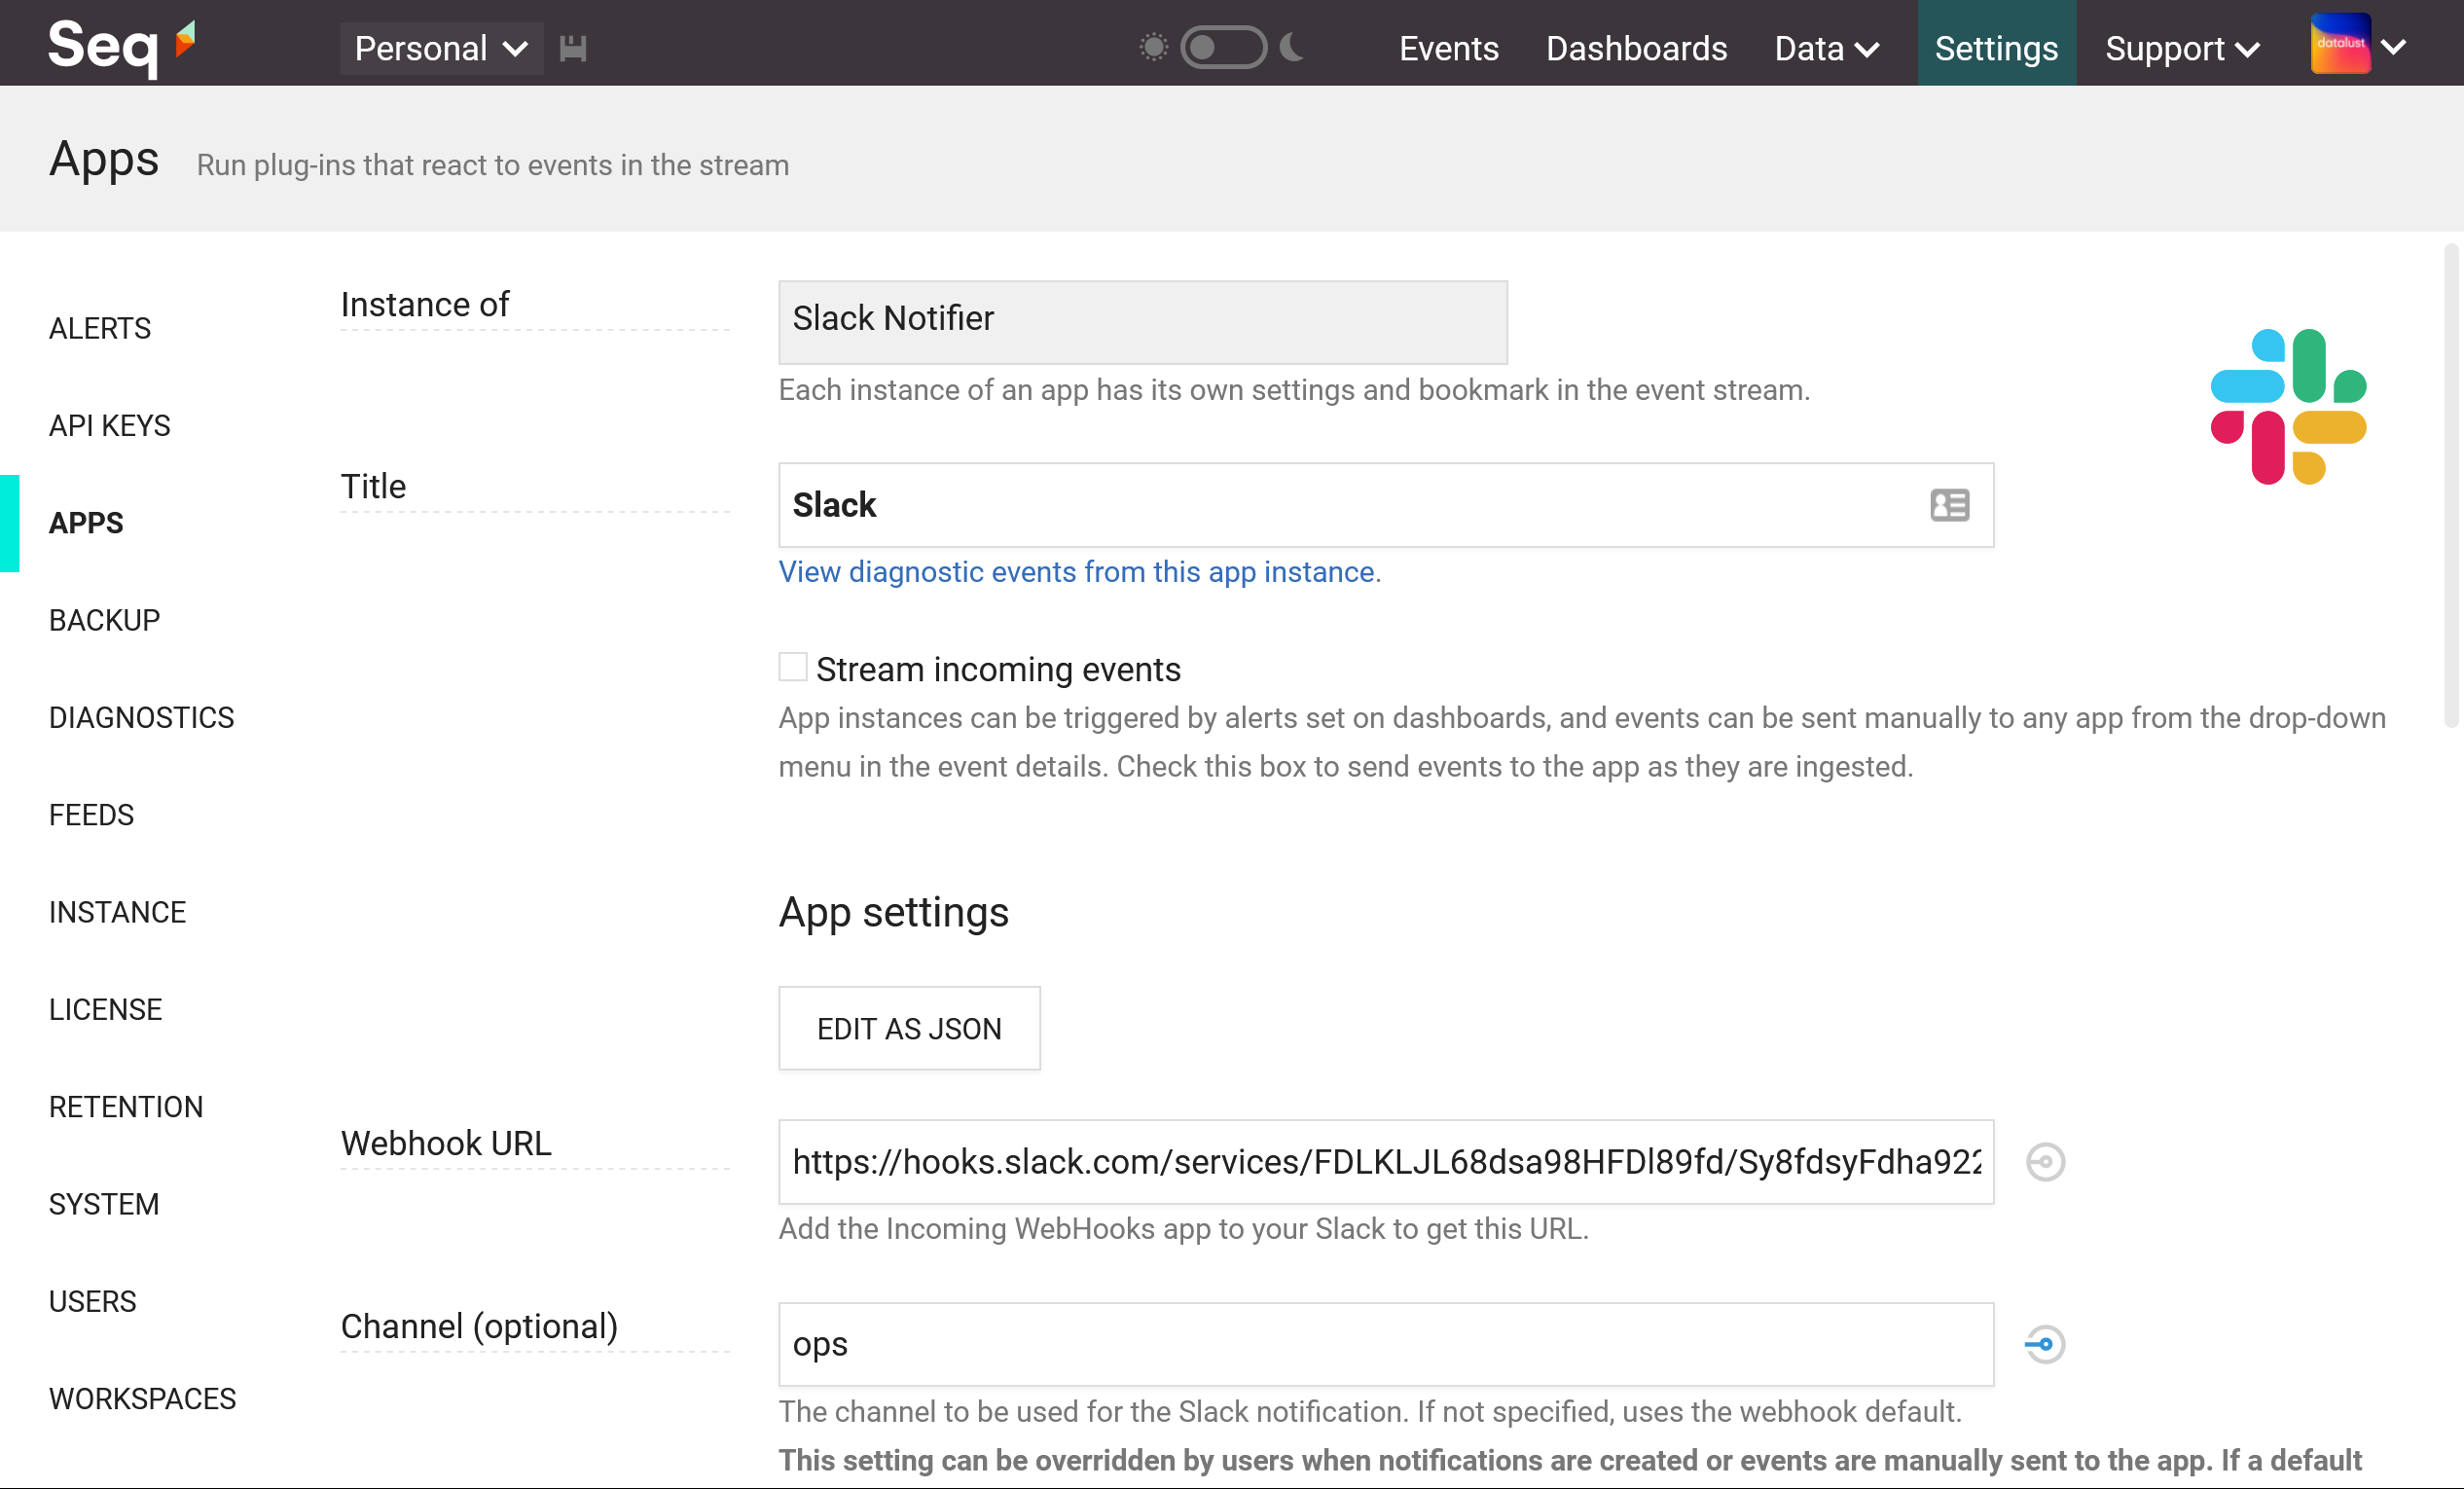 Configuring an instance of the Slack app for Seq.